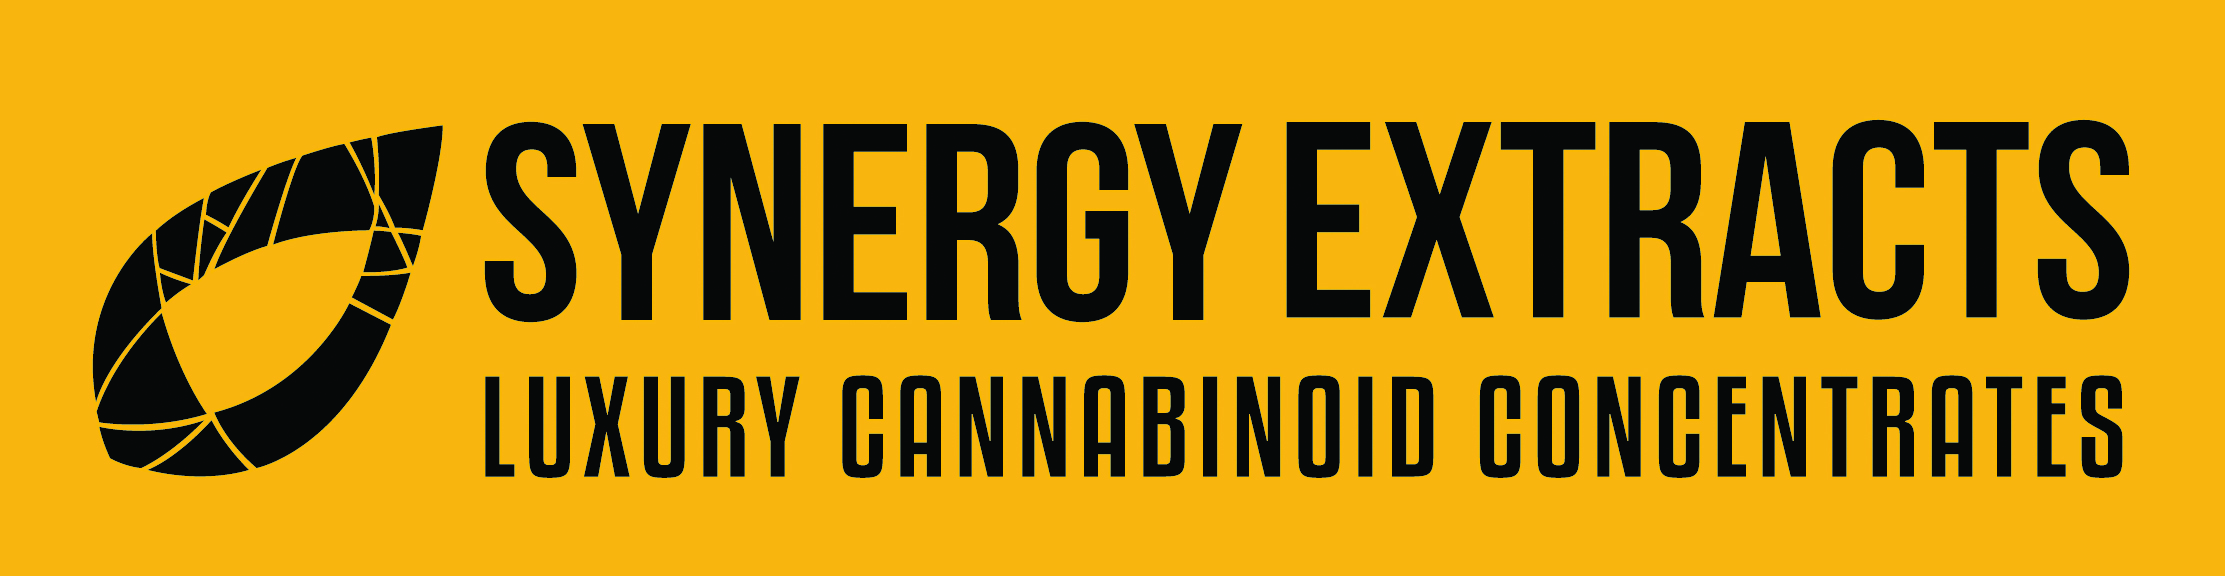 Synergy Extracts